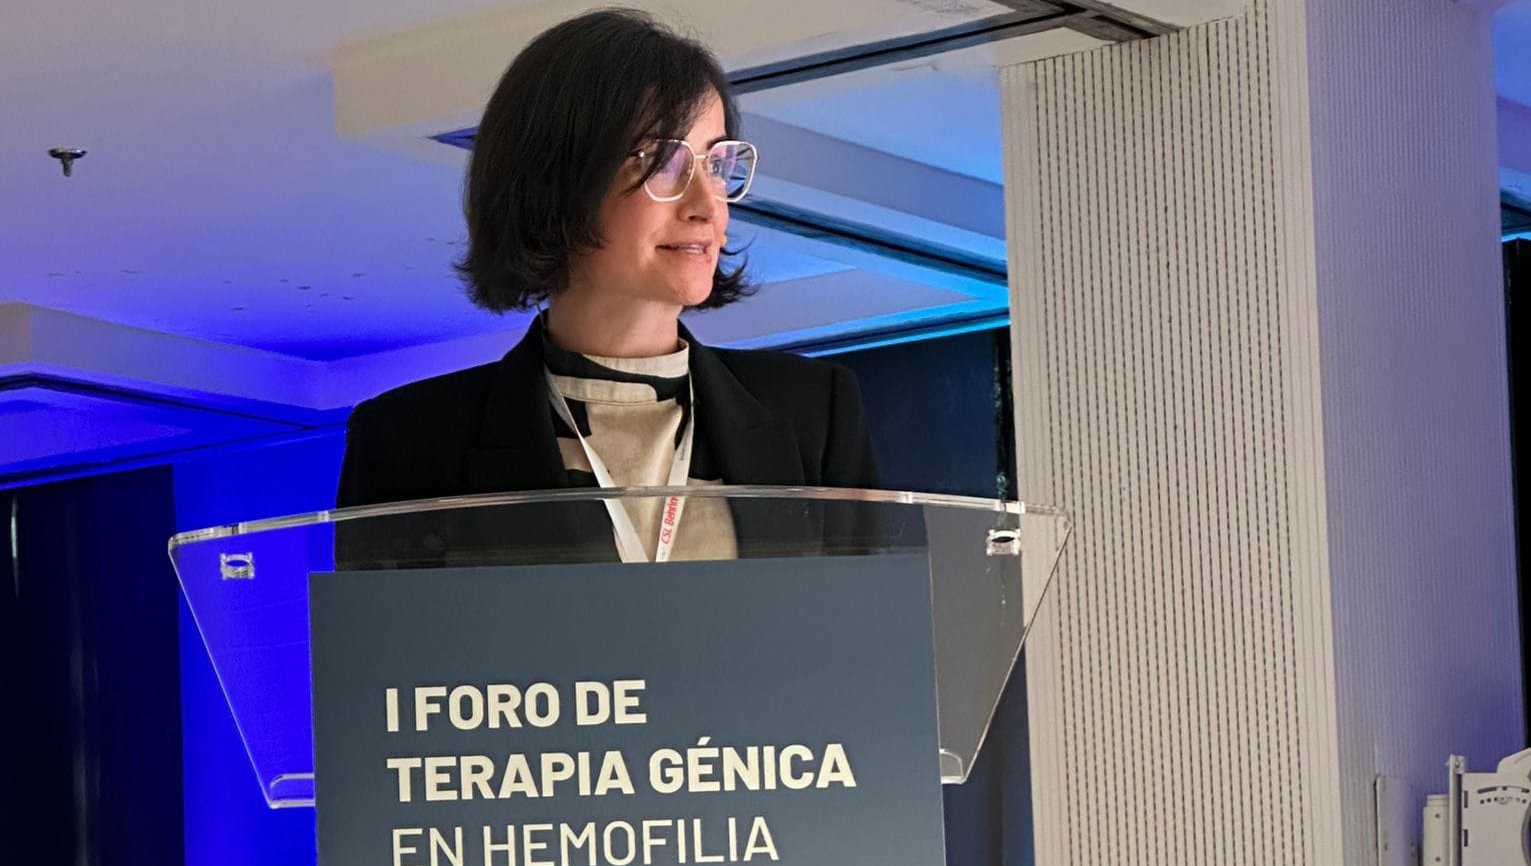 AELMHU represented by its executive director, Marian Corral, has participated in the I Gene Therapy Forum organized in Madrid by CSL Benring.